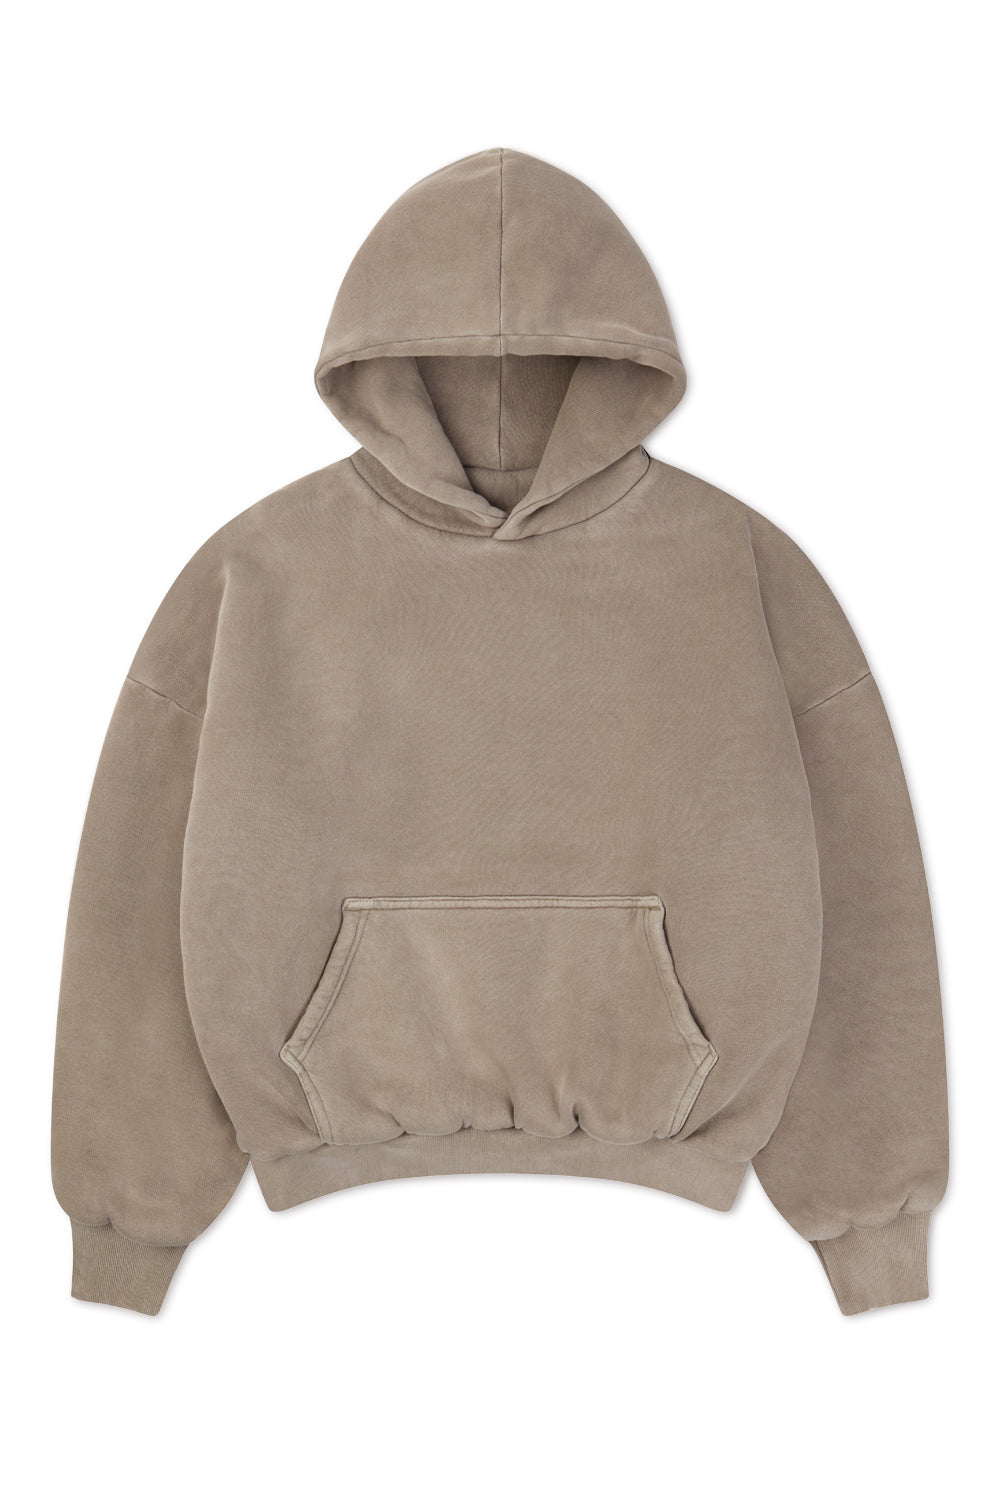 1000 GSM 'Mystery Box' Double Hoodie